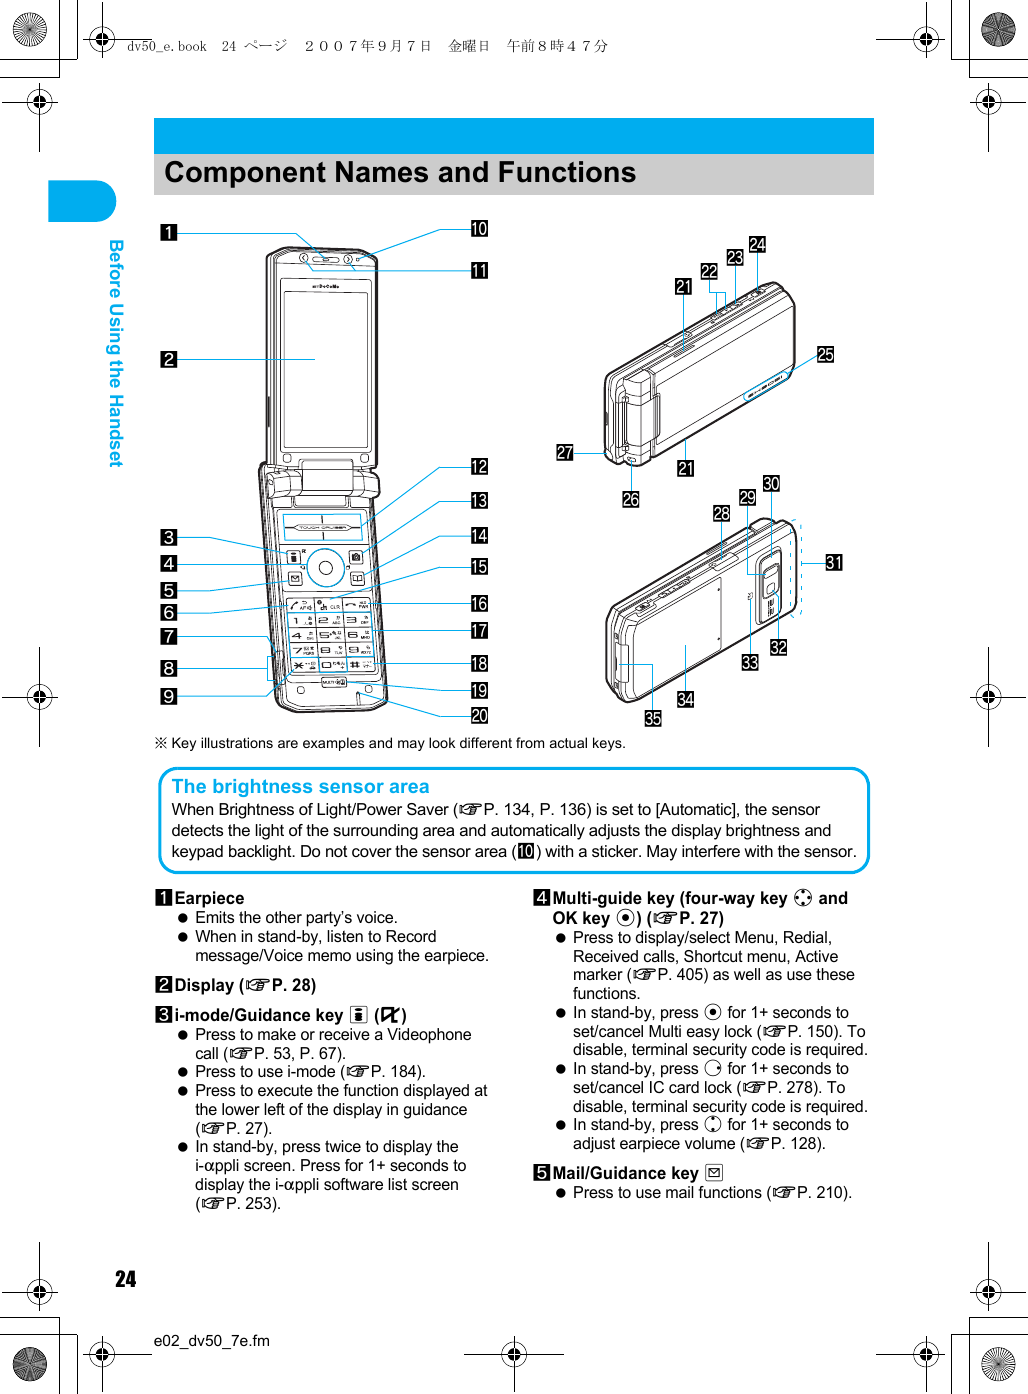 24e02_dv50_7e.fmBefore Using the Handset※Key illustrations are examples and may look different from actual keys.1Earpiece Emits the other party’s voice. When in stand-by, listen to Record message/Voice memo using the earpiece.2Display (nP. 28)3i-mode/Guidance key i (,) Press to make or receive a Videophone call (nP. 53, P. 67). Press to use i-mode (nP. 184). Press to execute the function displayed at the lower left of the display in guidance (nP. 27). In stand-by, press twice to display the i-appli screen. Press for 1+ seconds to display the i-appli software list screen (nP. 253).4Multi-guide key (four-way key w and OK key t) (nP. 27) Press to display/select Menu, Redial, Received calls, Shortcut menu, Active marker (nP. 405) as well as use these functions. In stand-by, press t for 1+ seconds to set/cancel Multi easy lock (nP. 150). To disable, terminal security code is required. In stand-by, press r for 1+ seconds to set/cancel IC card lock (nP. 278). To disable, terminal security code is required. In stand-by, press u for 1+ seconds to adjust earpiece volume (nP. 128).5Mail/Guidance key m Press to use mail functions (nP. 210).Component Names and Functionsvutifehdgc216945omlab38kjnpqrlszyxw7The brightness sensor areaWhen Brightness of Light/Power Saver (nP. 134, P. 136) is set to [Automatic], the sensor detects the light of the surrounding area and automatically adjusts the display brightness and keypad backlight. Do not cover the sensor area (a) with a sticker. May interfere with the sensor. dv50_e.book  24 ページ  ２００７年９月７日　金曜日　午前８時４７分